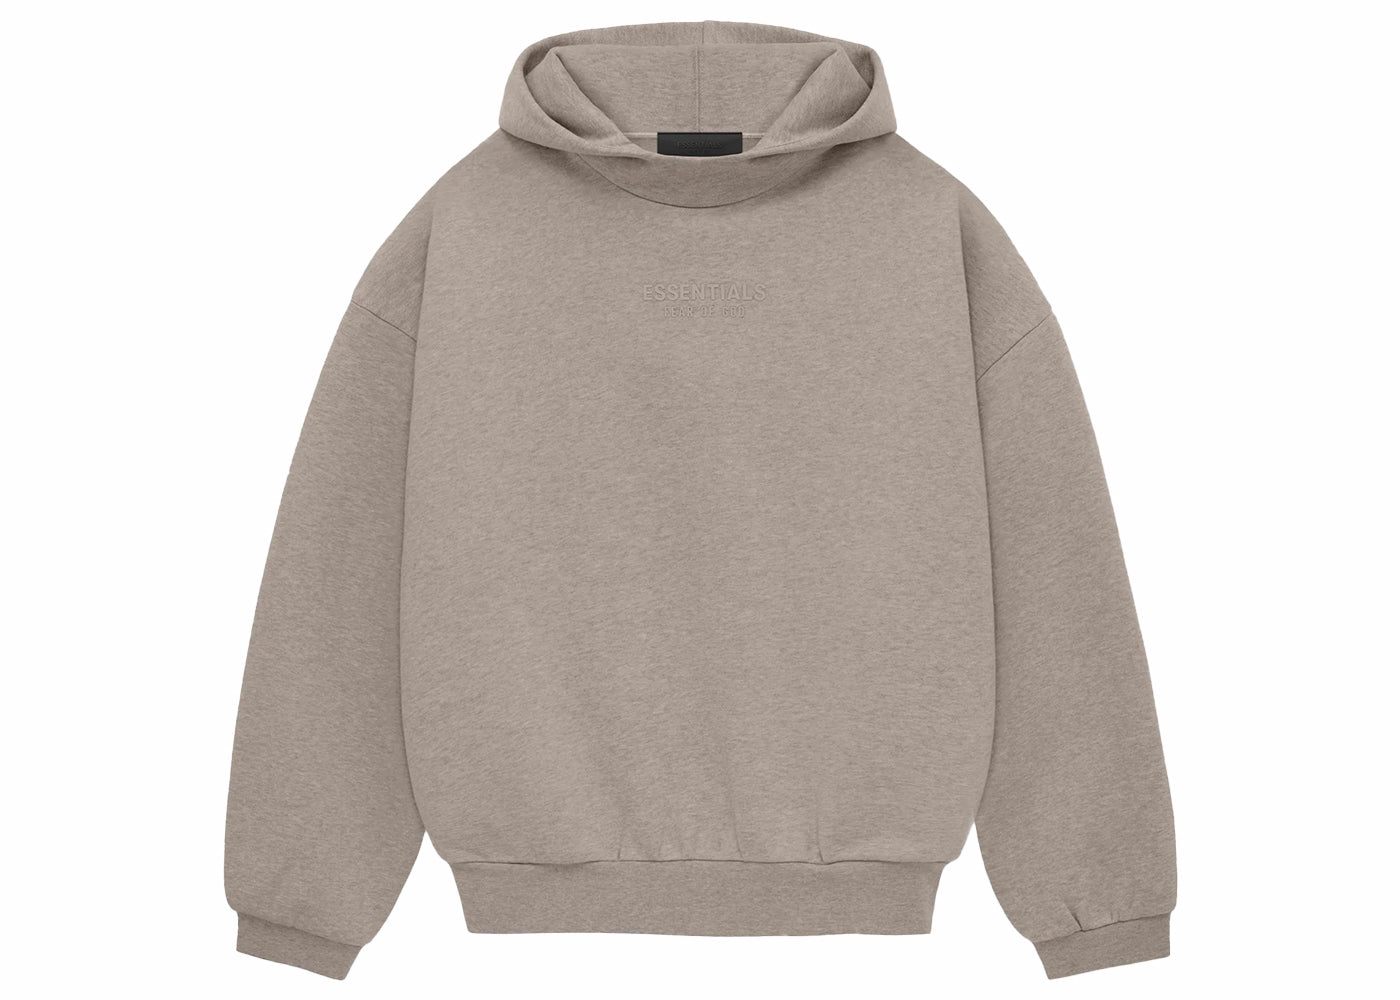 FEAR OF GOD ESSENTIALS HOODIE CORE HEATHER